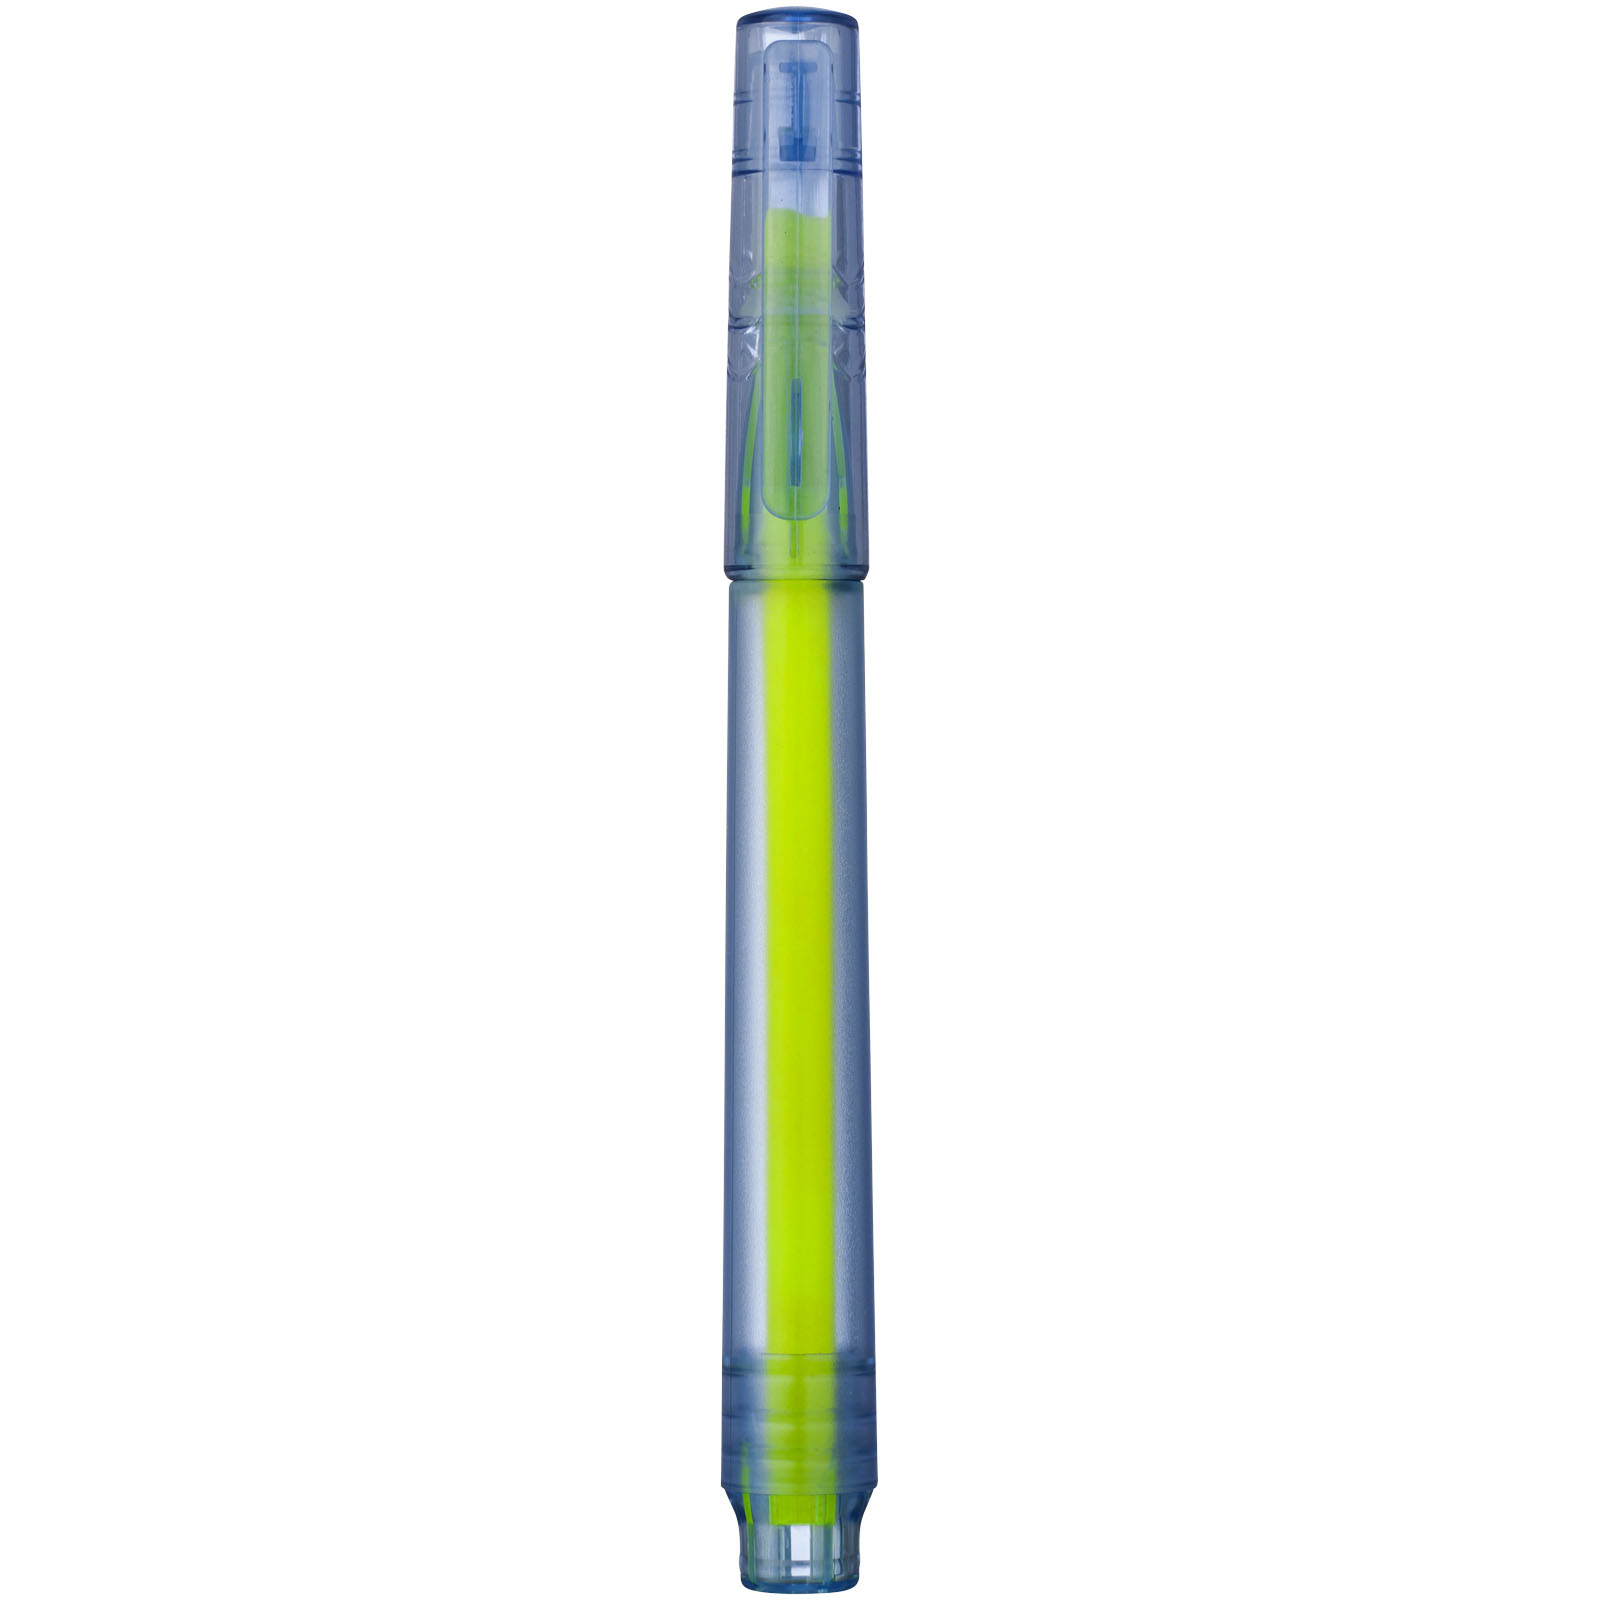 Vancouver Recycled Highlighter - Banwell